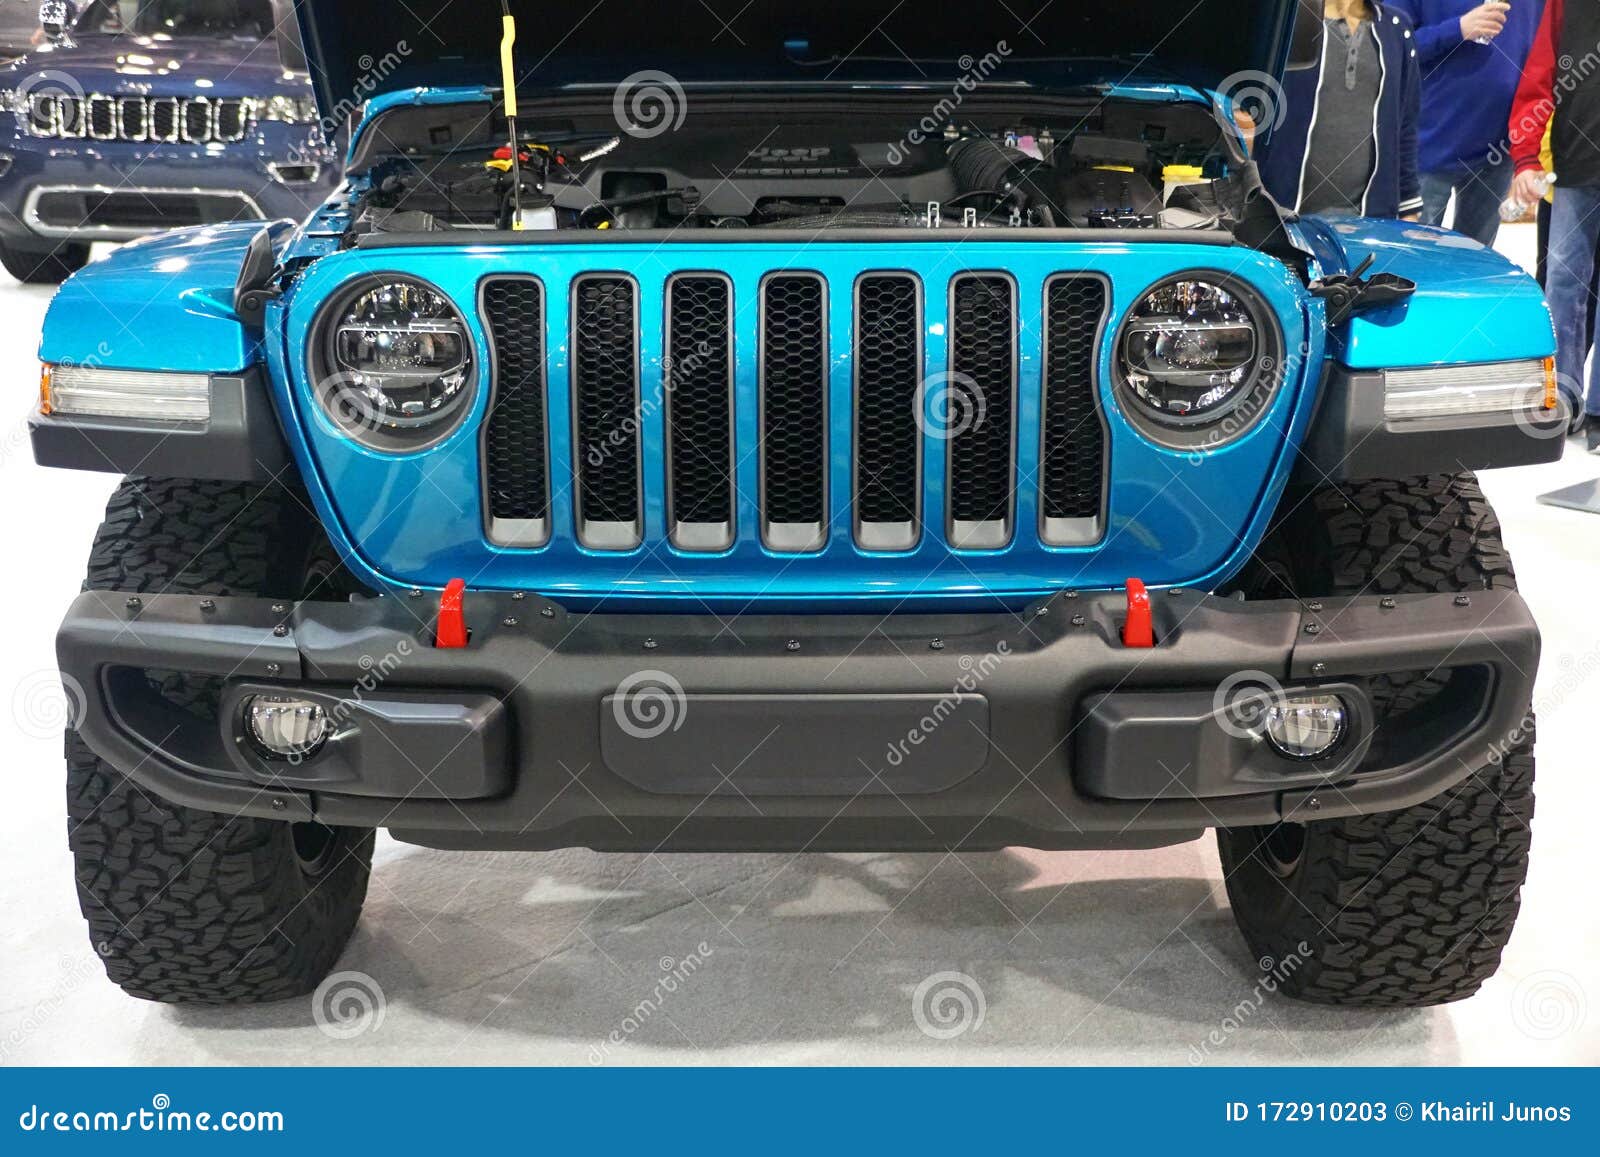 Philadelphia Pennsylvania U S A February 9 The Front View Of The Jeep Wrangler Unlimited Rubicon 4x4 Blue Color Editorial Stock Photo Image Of Brand Design